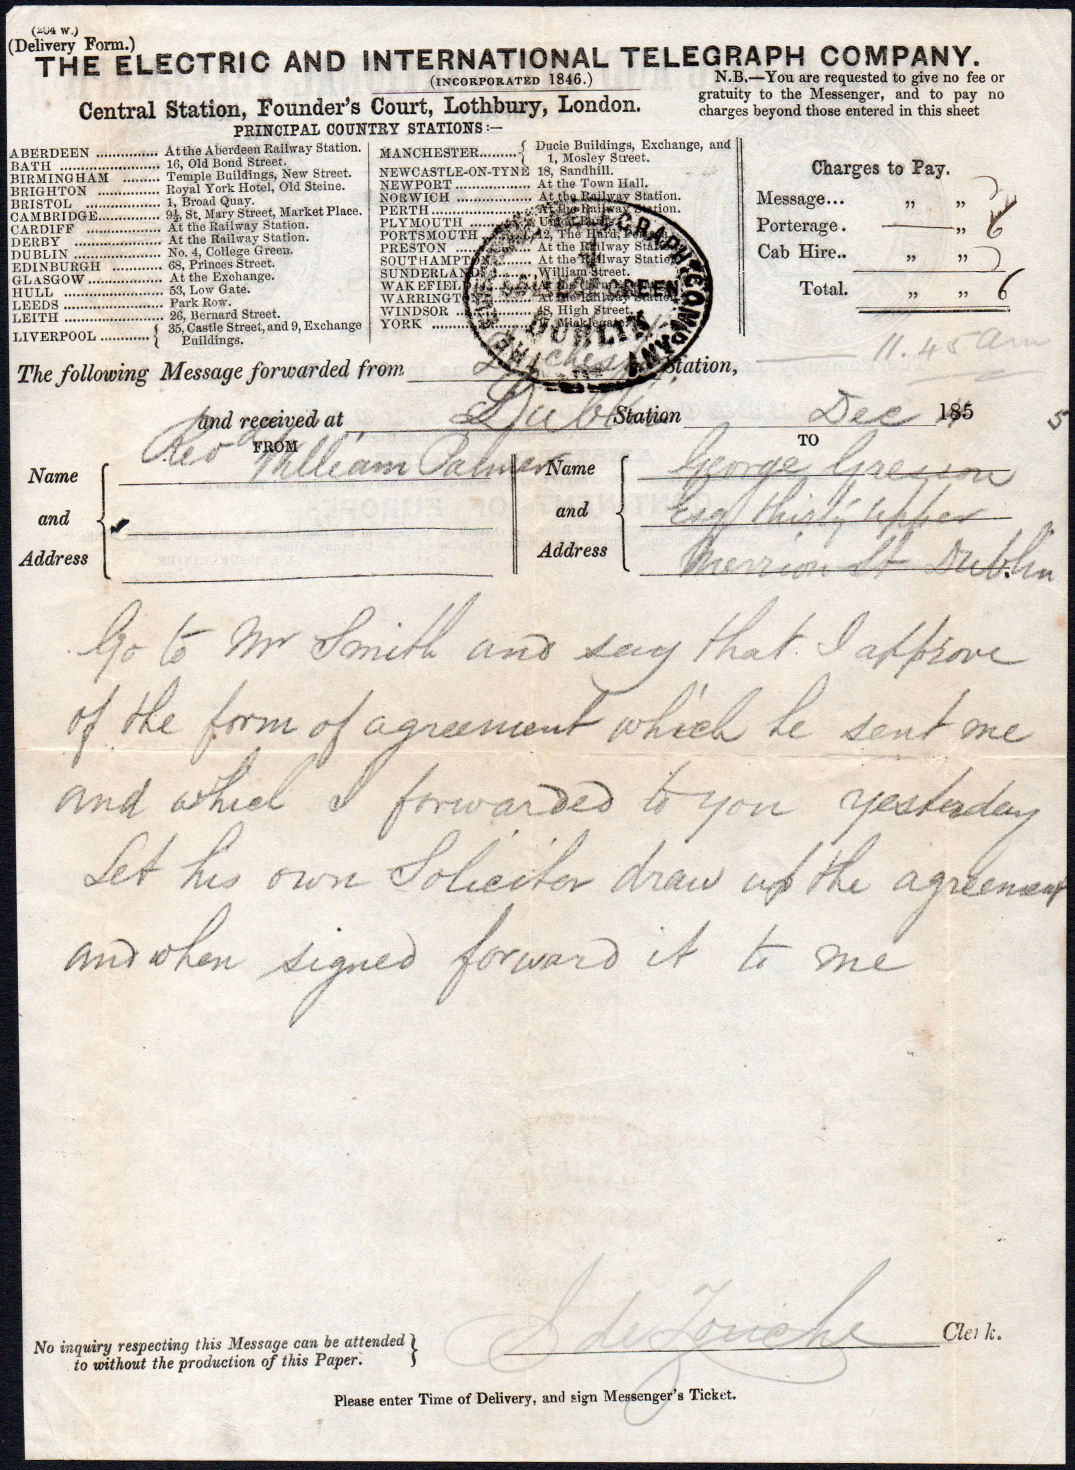 Electric Telegraph Company Stationery 1856 - front.